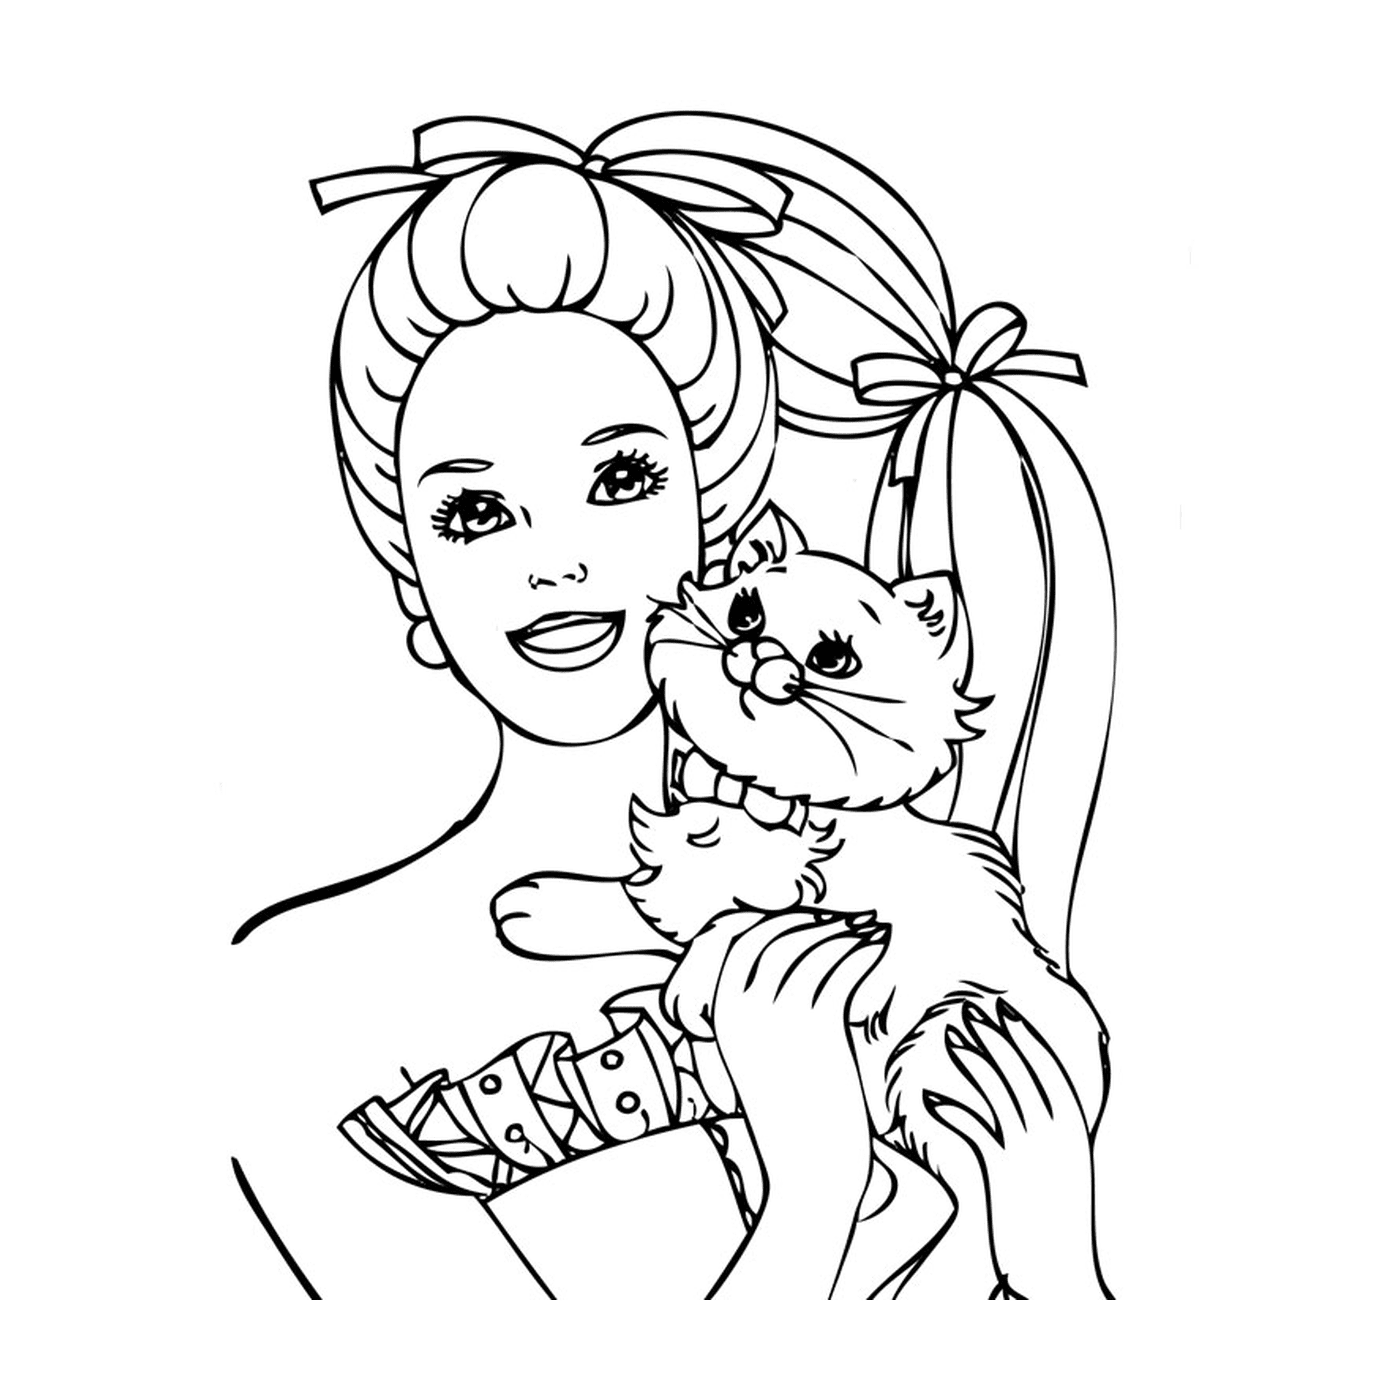  Barbie Musketeer with a woman holding a cat 